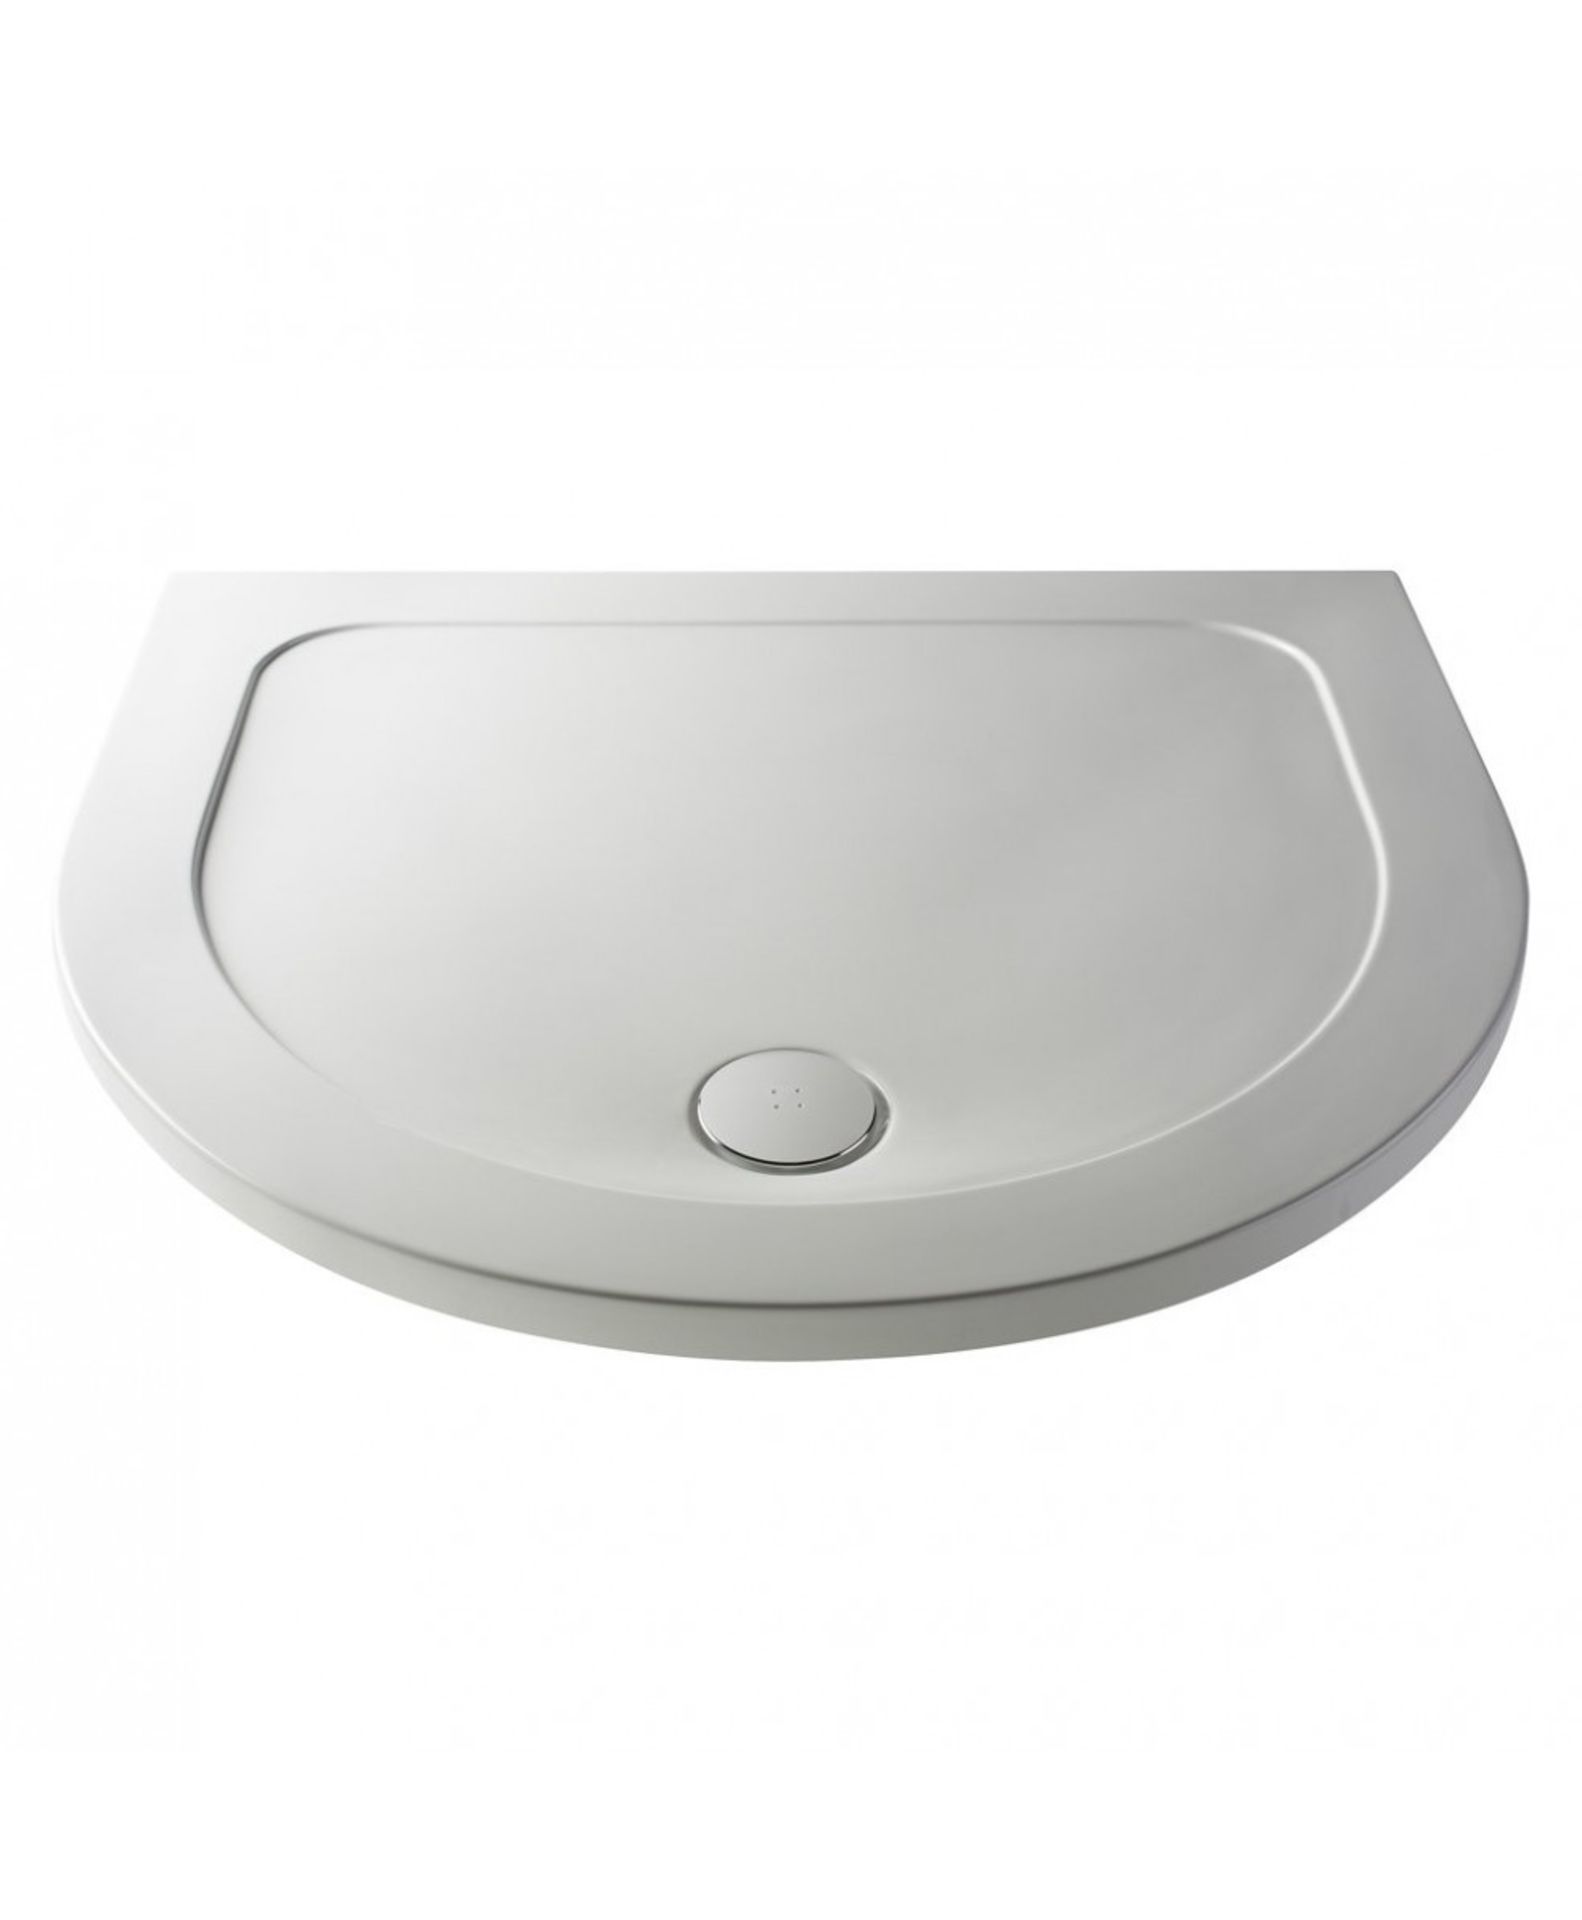 (PC41) Twyfords 770mm Hydro D Shape White Shower tray. Low profile ultra slim design Gel coate...( - Image 2 of 3